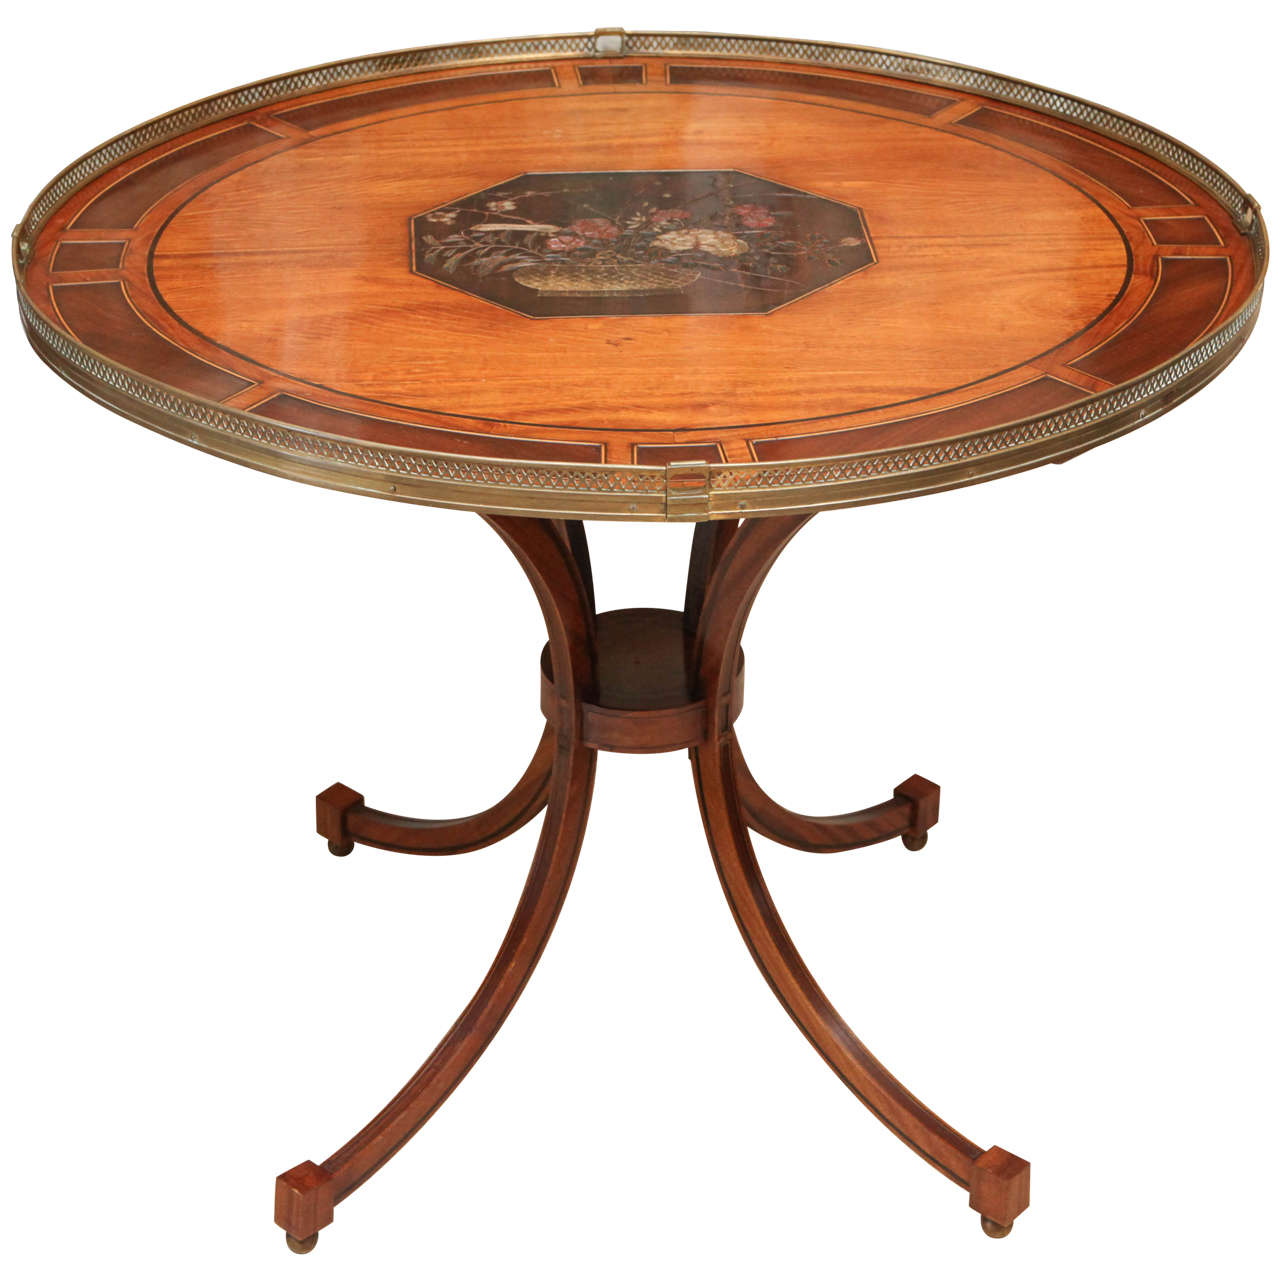 1820 English Mahogany Tea Table with Coramandel Plaque Insert For Sale